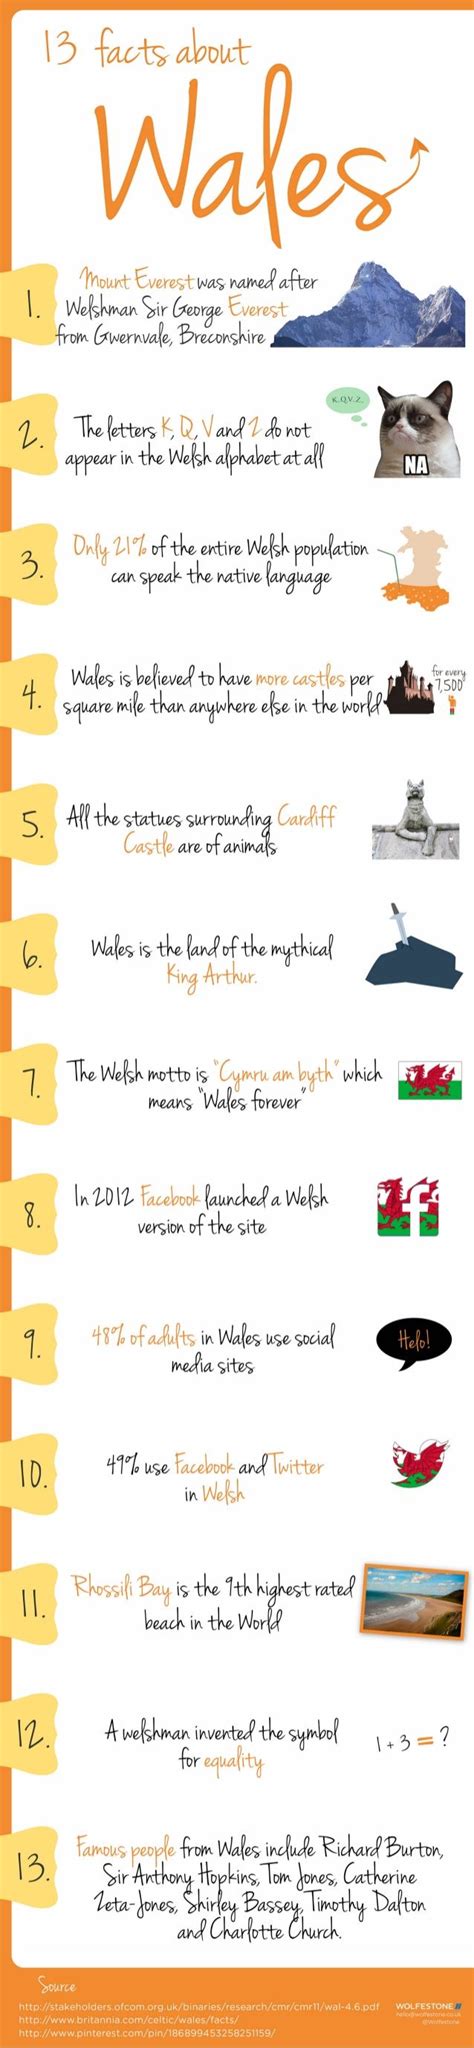 interesting facts about wales uk